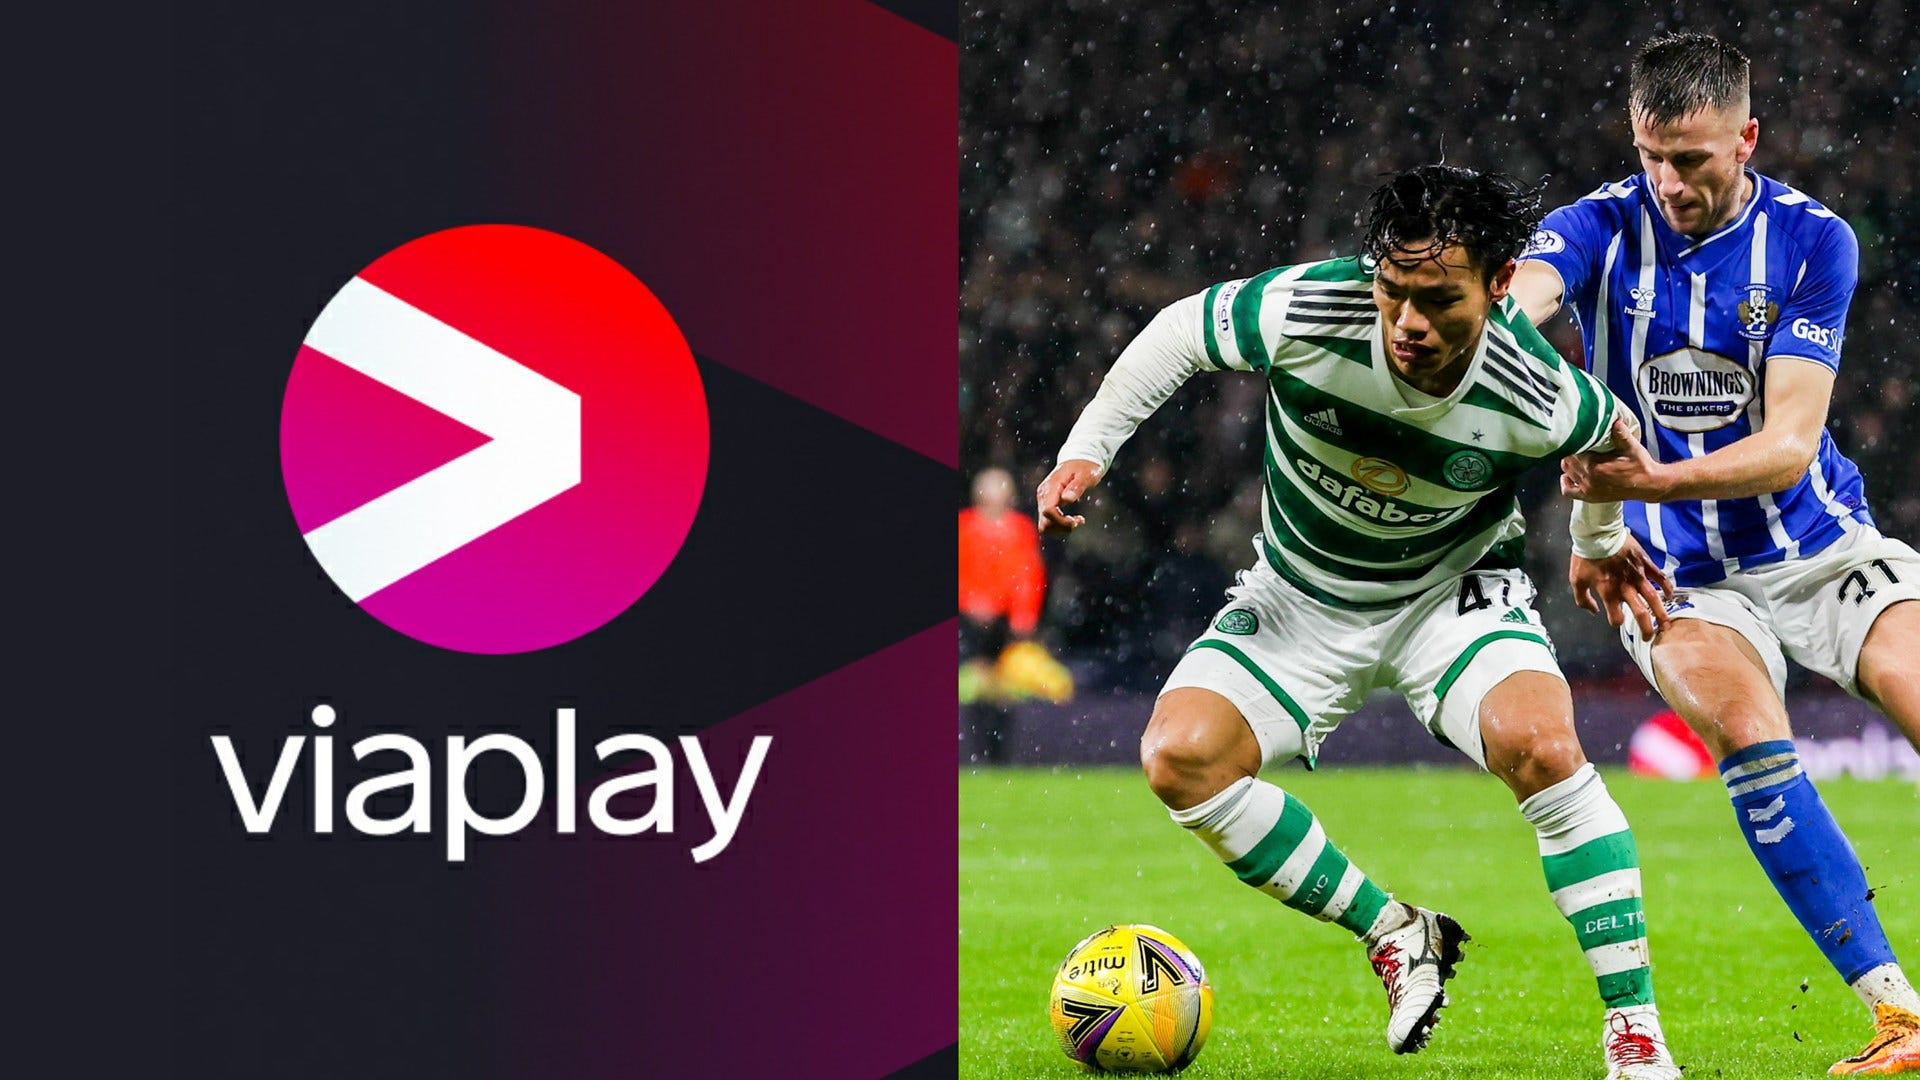 Stream live football on Viaplay App, prices, subscription packages, platforms and full list of competitions to watch Goal UK